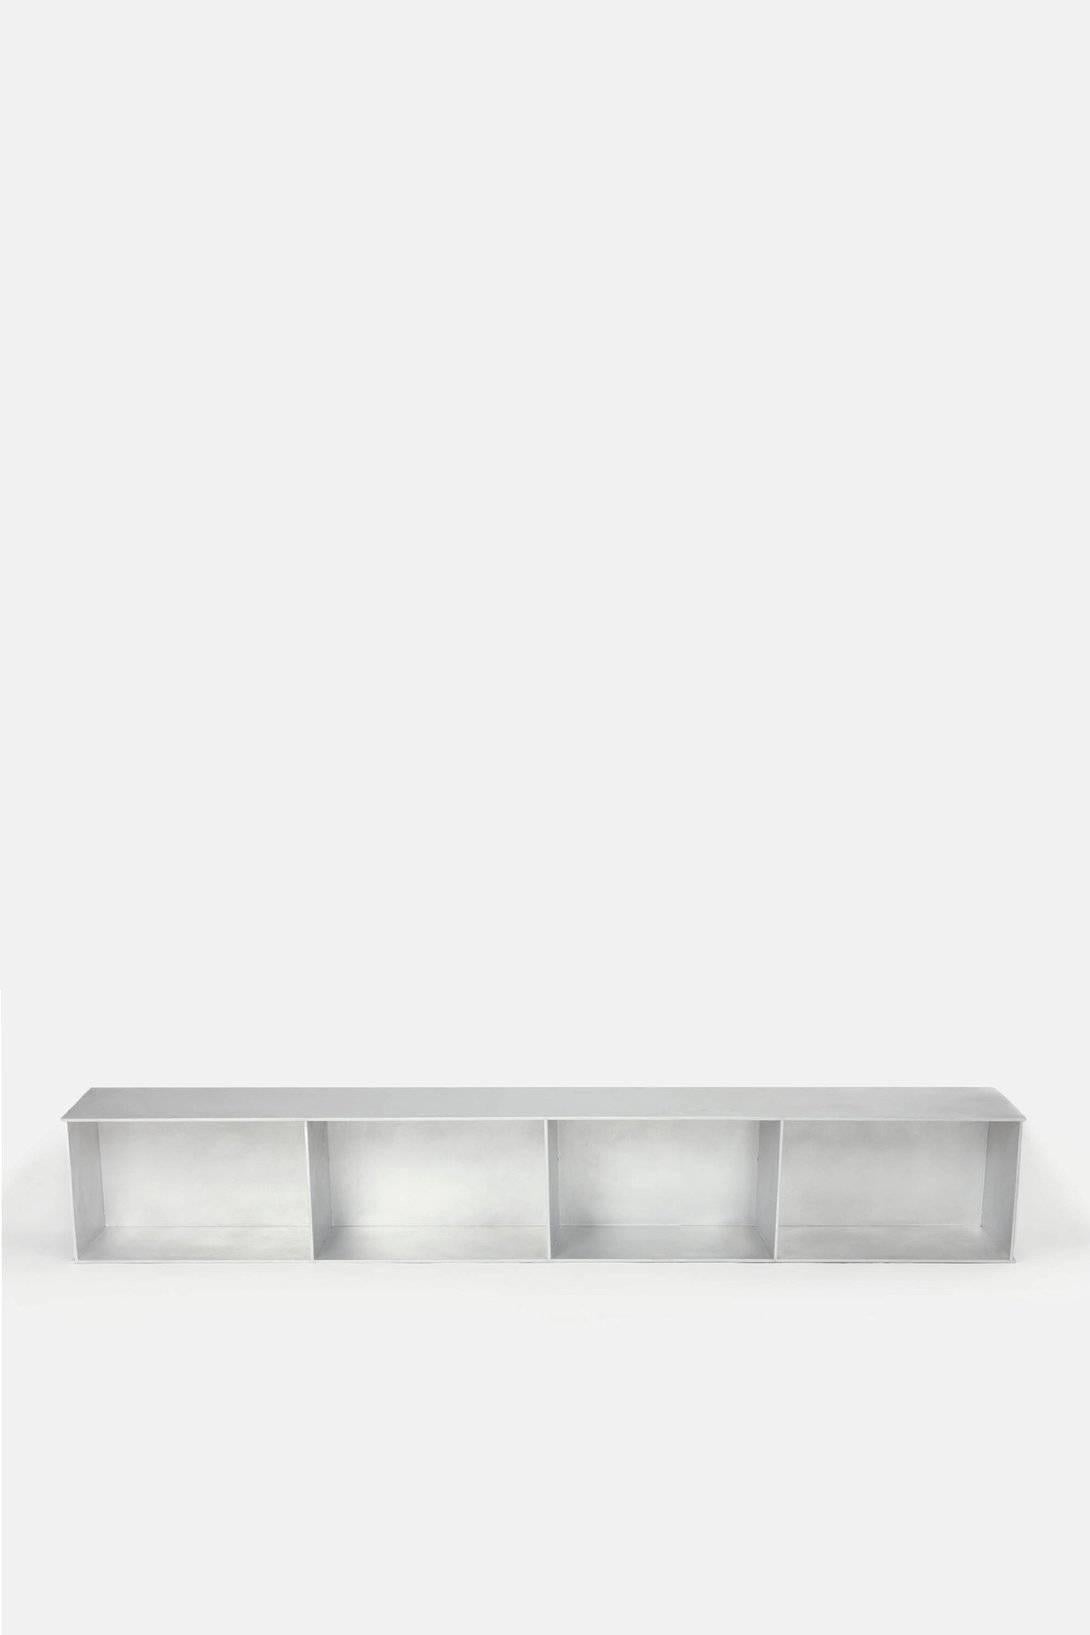 4G Wall-Mounted Shelf in Waxed Aluminum Plate by Jonathan Nesci In New Condition For Sale In Columbus, IN